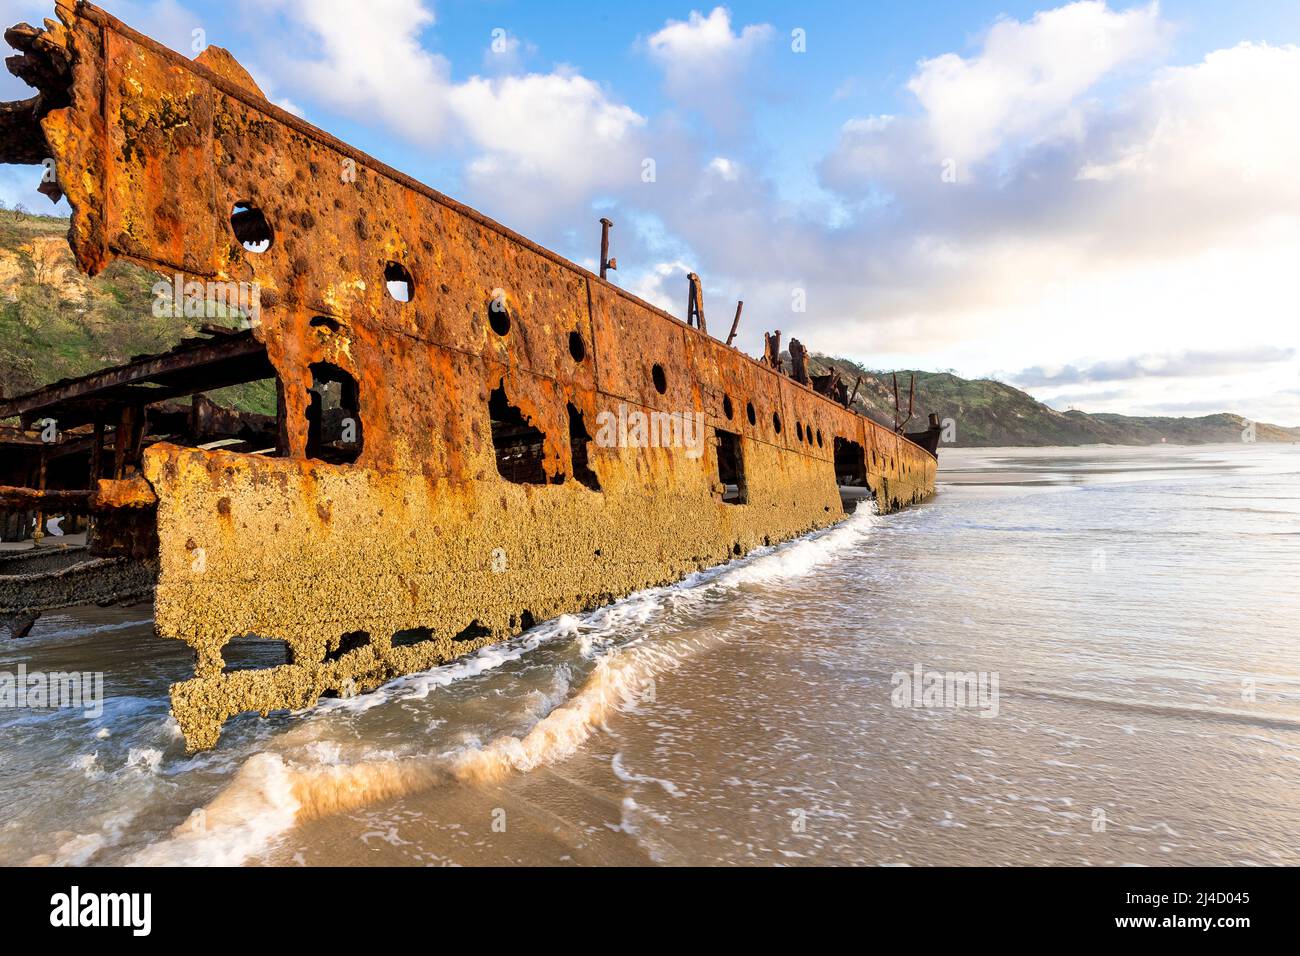 Starboard side of Maheno shipwreck, early morning on Seventy Five Mile Beach, Fraser Island, Queensland, Australia Stock Photo